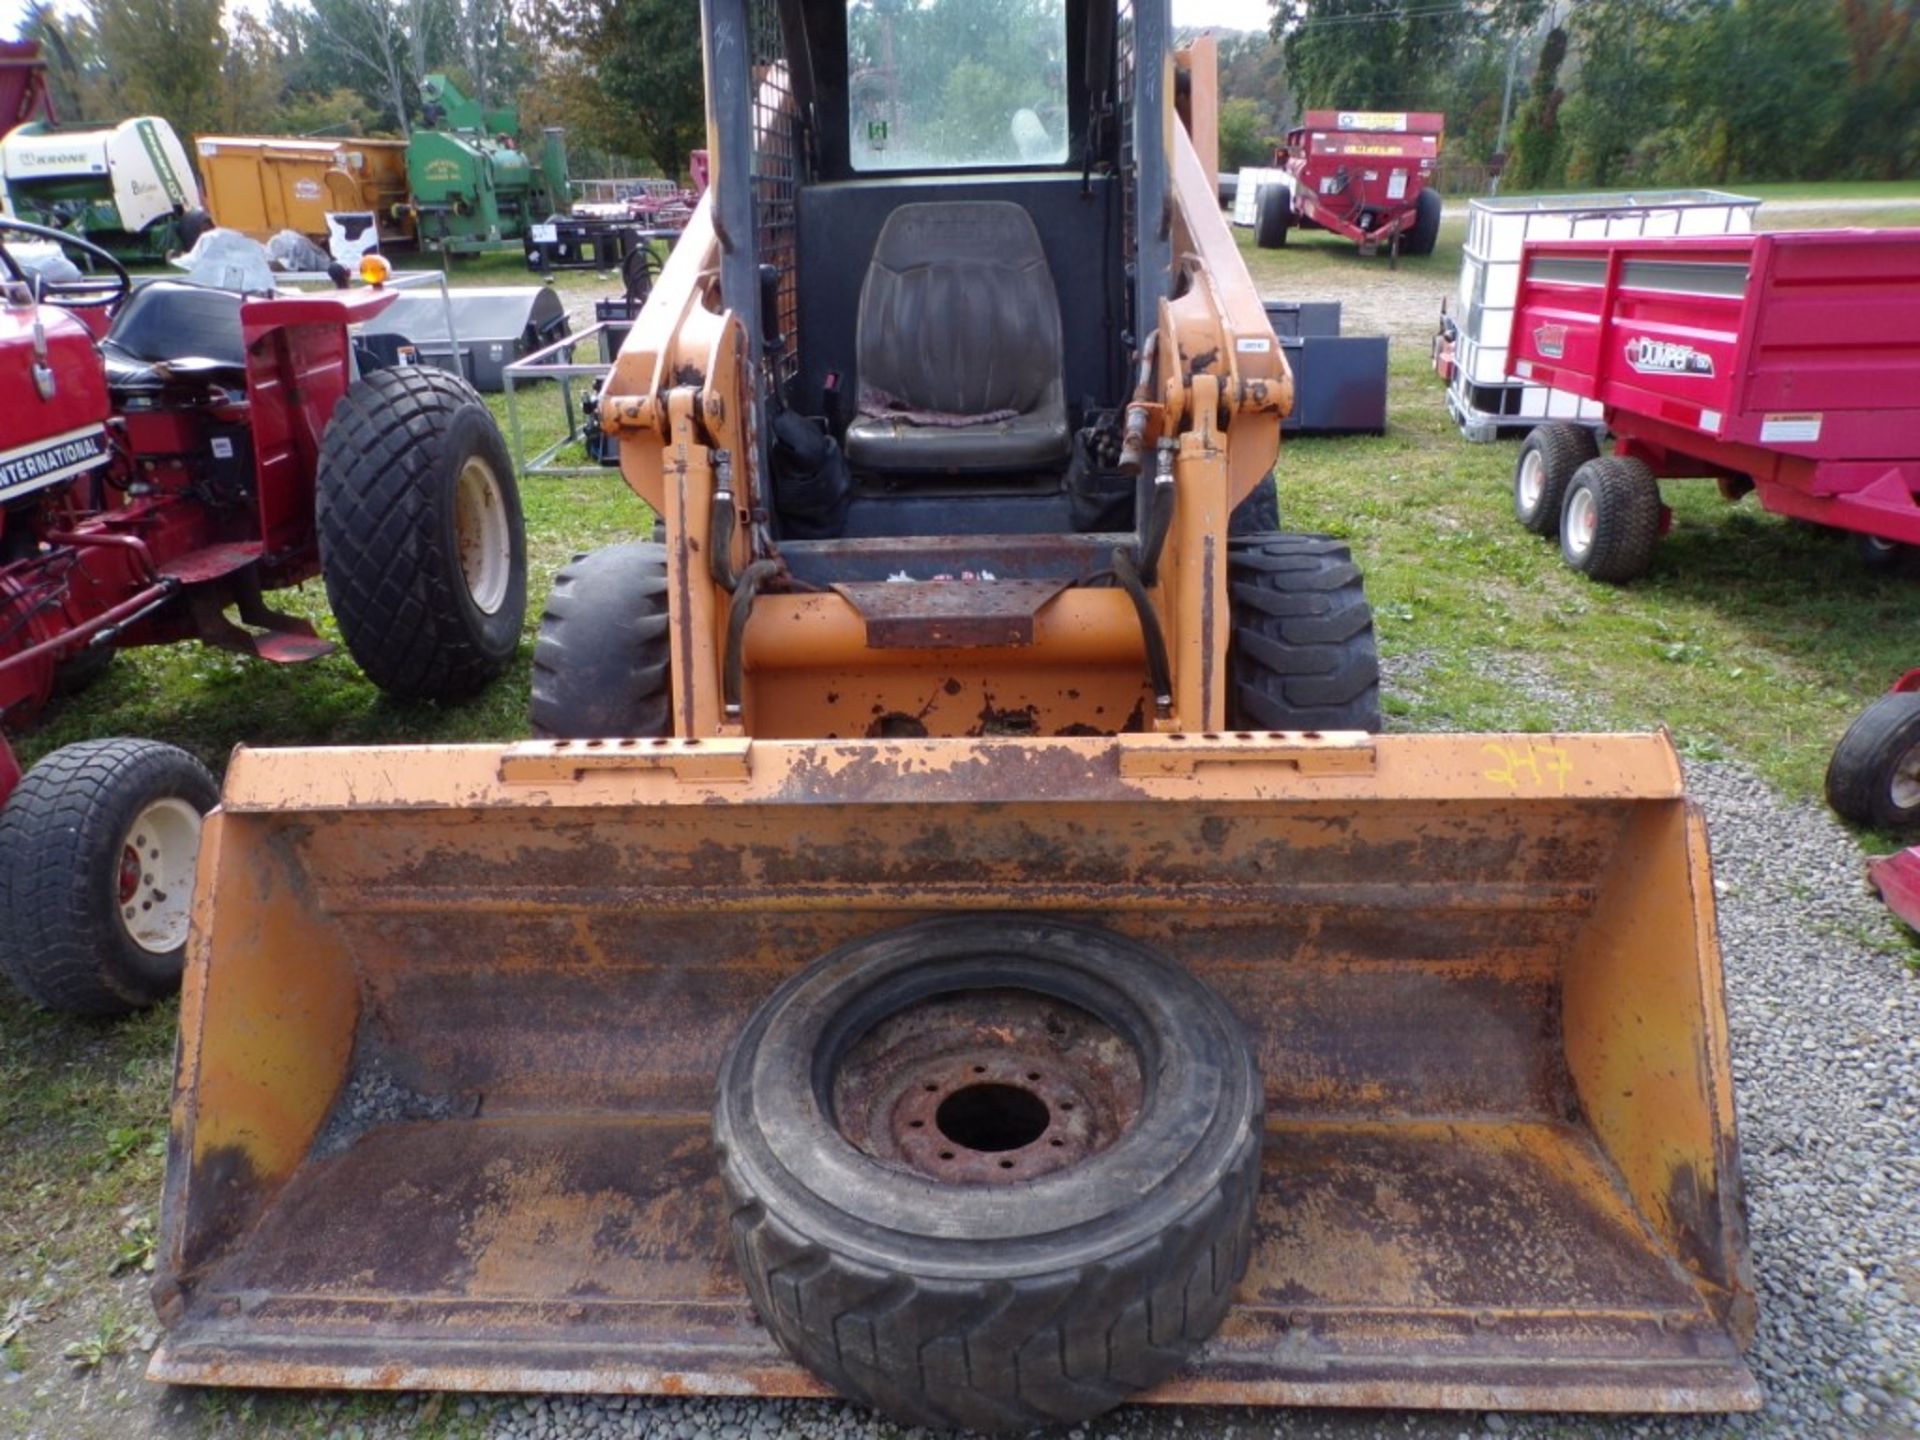 Case 40XT Skid Steer w/Case 78'' Bucket, Hnd Controls, 792 Hours, Serial 384834 (5443) - Image 2 of 5